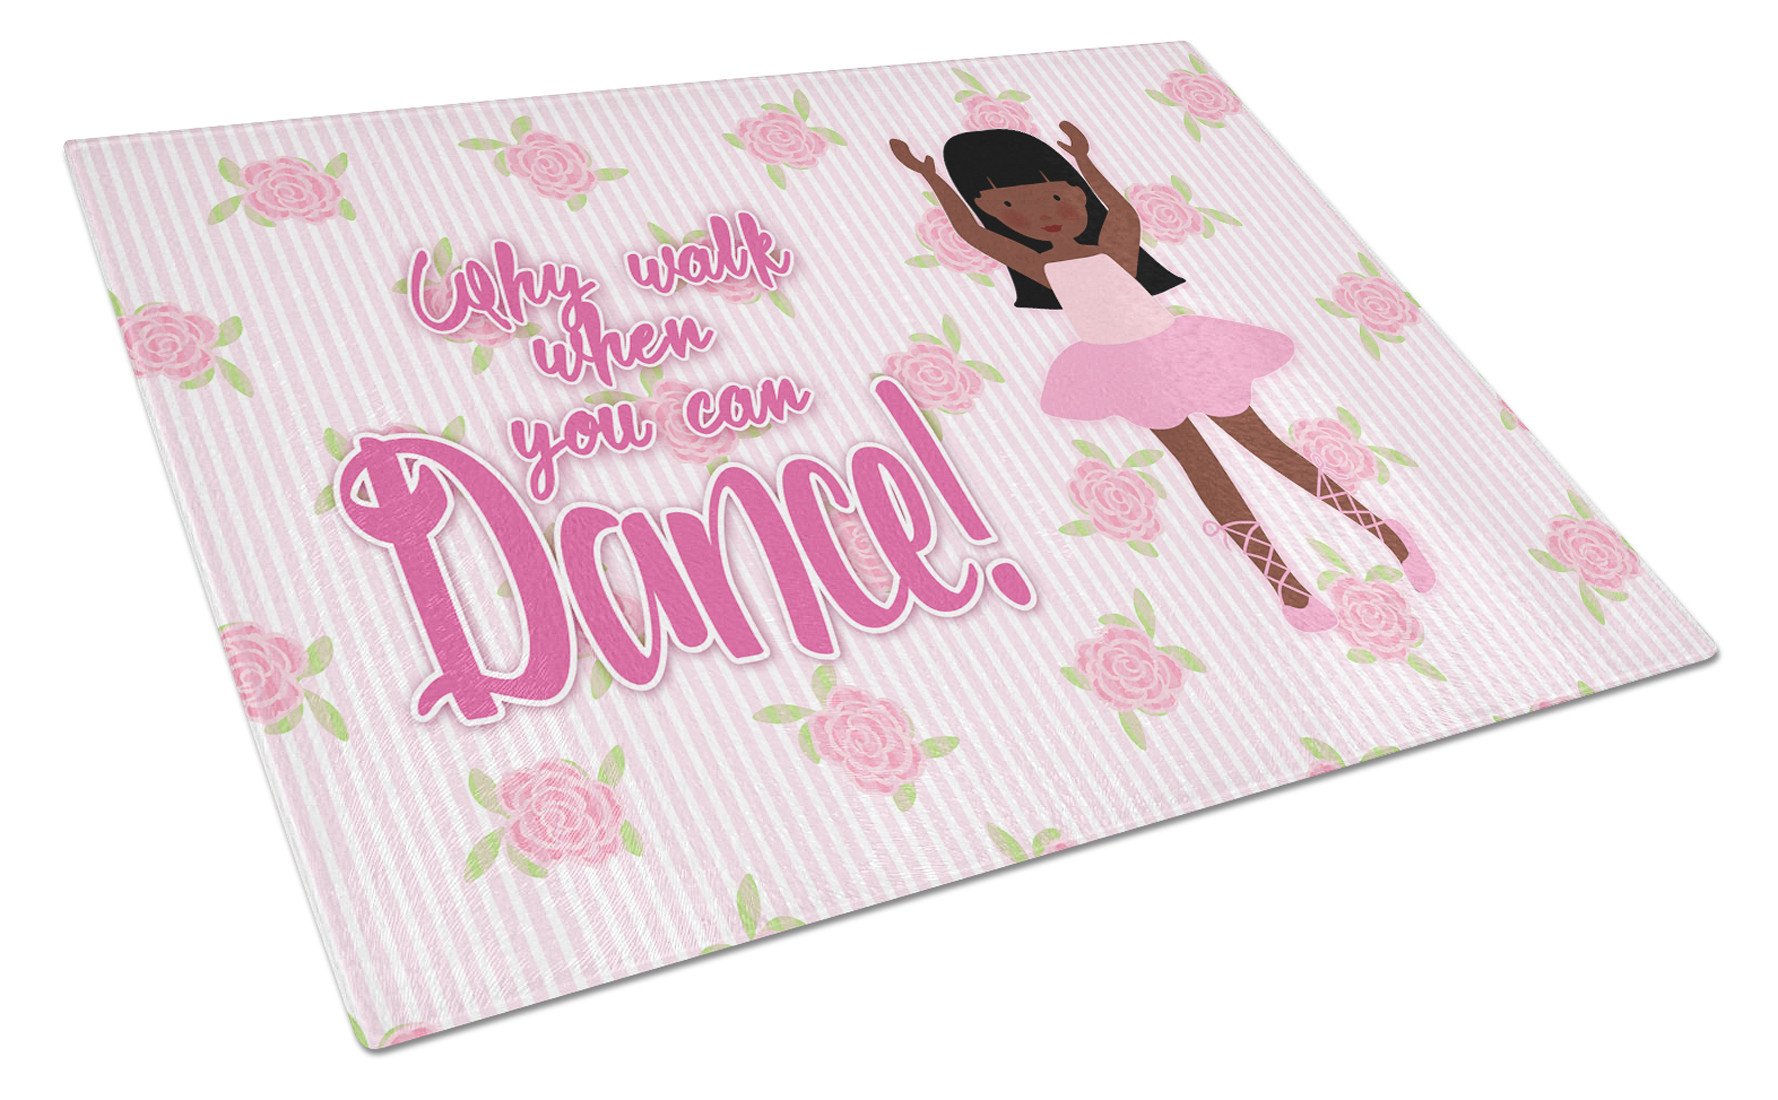 Ballet Long Hair African American Glass Cutting Board Large BB5389LCB by Caroline's Treasures